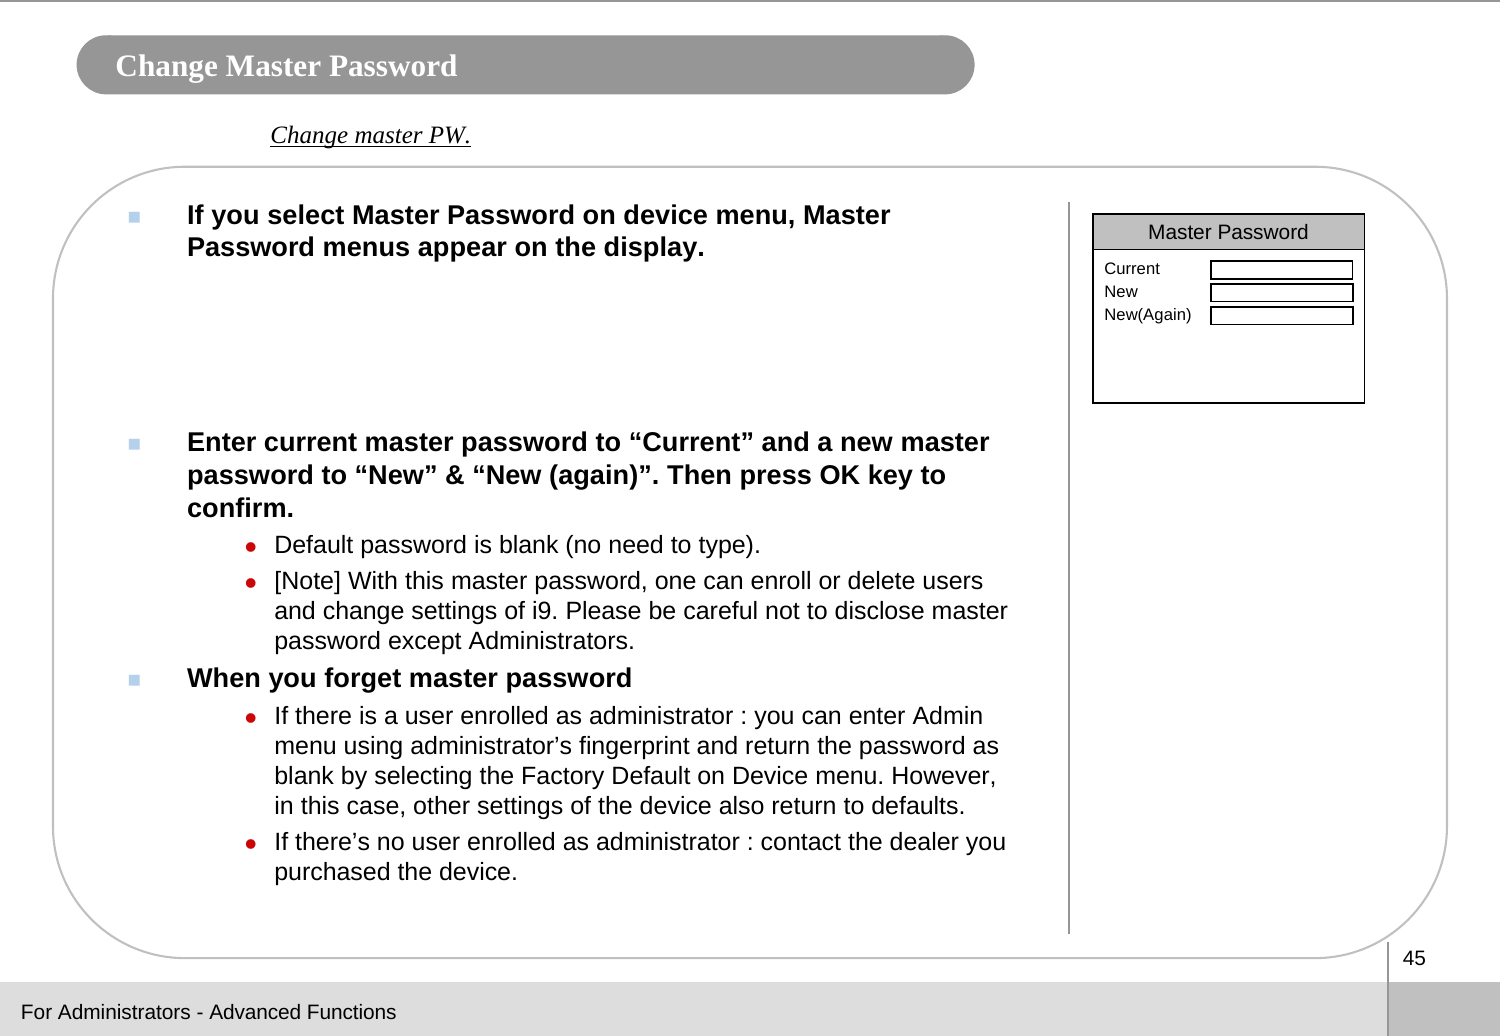 45Change Master PasswordIf you select Master Password on device menu, Master Password menus appear on the display. Enter current master password to “Current” and a new master password to “New” &amp; “New (again)”. Then press OK key to confirm. zDefault password is blank (no need to type).  z[Note] With this master password, one can enroll or delete usersand change settings of i9. Please be careful not to disclose master password except Administrators. When you forget master passwordzIf there is a user enrolled as administrator : you can enter Admin menu using administrator’s fingerprint and return the password as blank by selecting the Factory Default on Device menu. However, in this case, other settings of the device also return to defaults.zIf there’s no user enrolled as administrator : contact the dealer you purchased the device.Master PasswordCurrentNewNew(Again)Change master PW.For Administrators - Advanced Functions